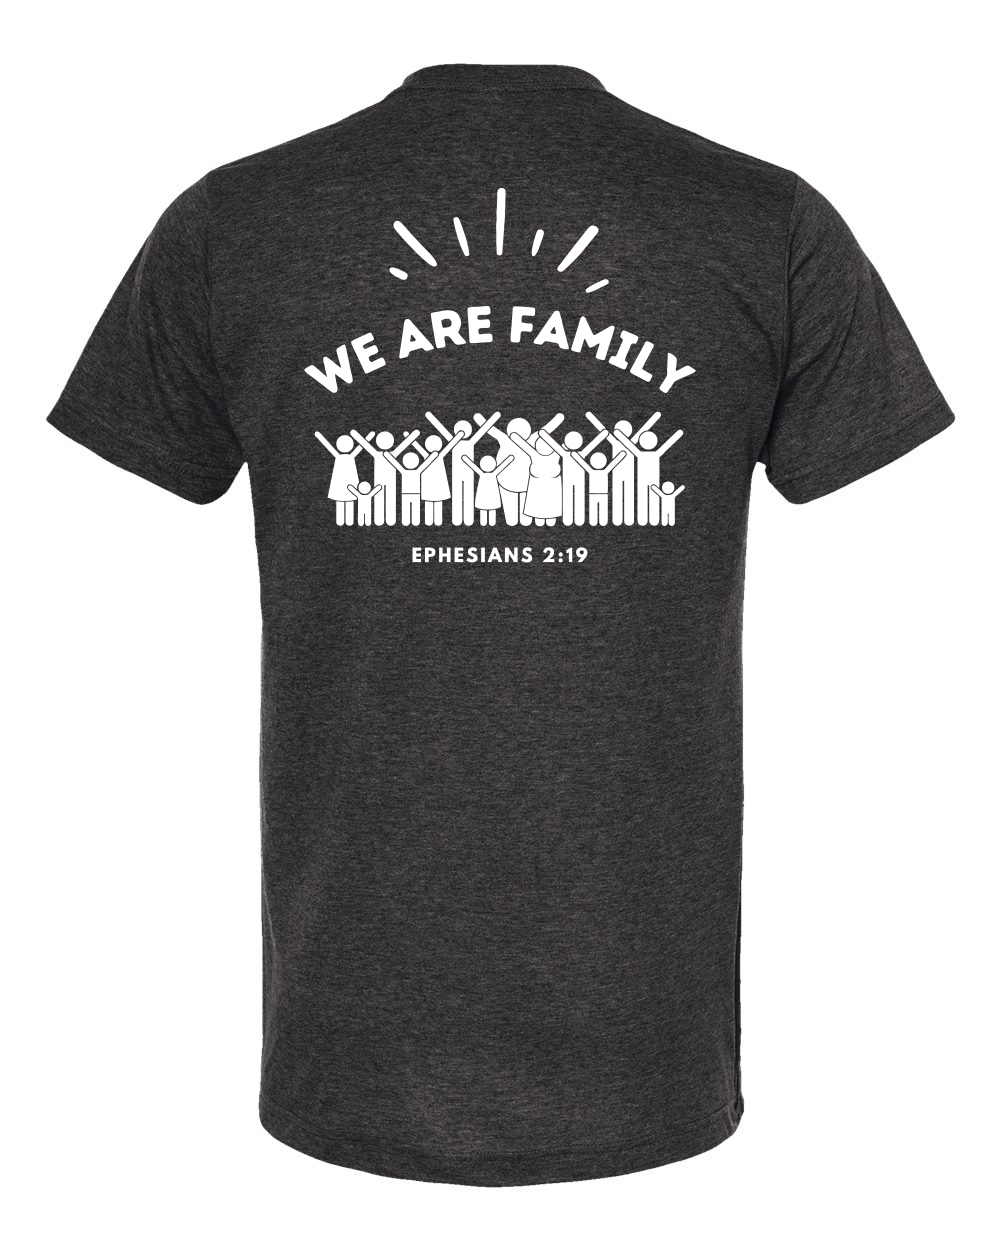 We are Family Adult T-Shirt